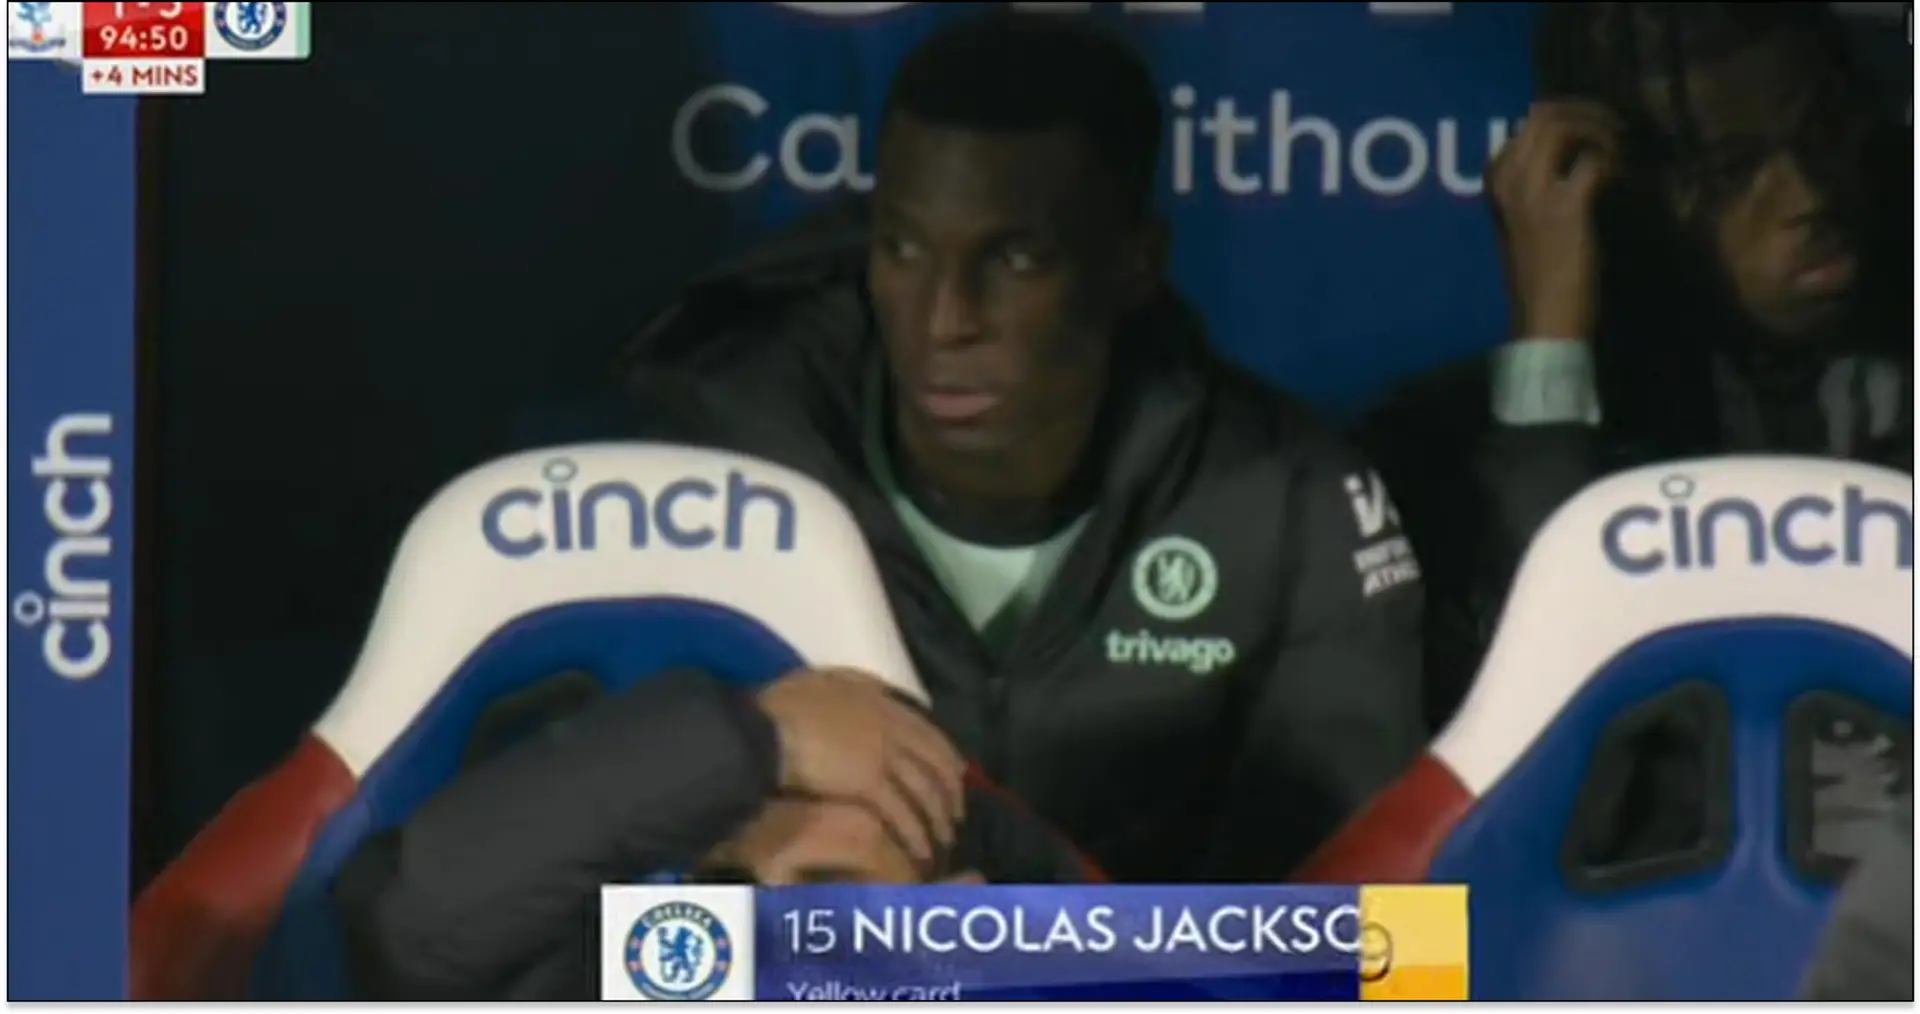 Jackson gets yellow card while on bench v Palace — he's one booking away from two-game ban